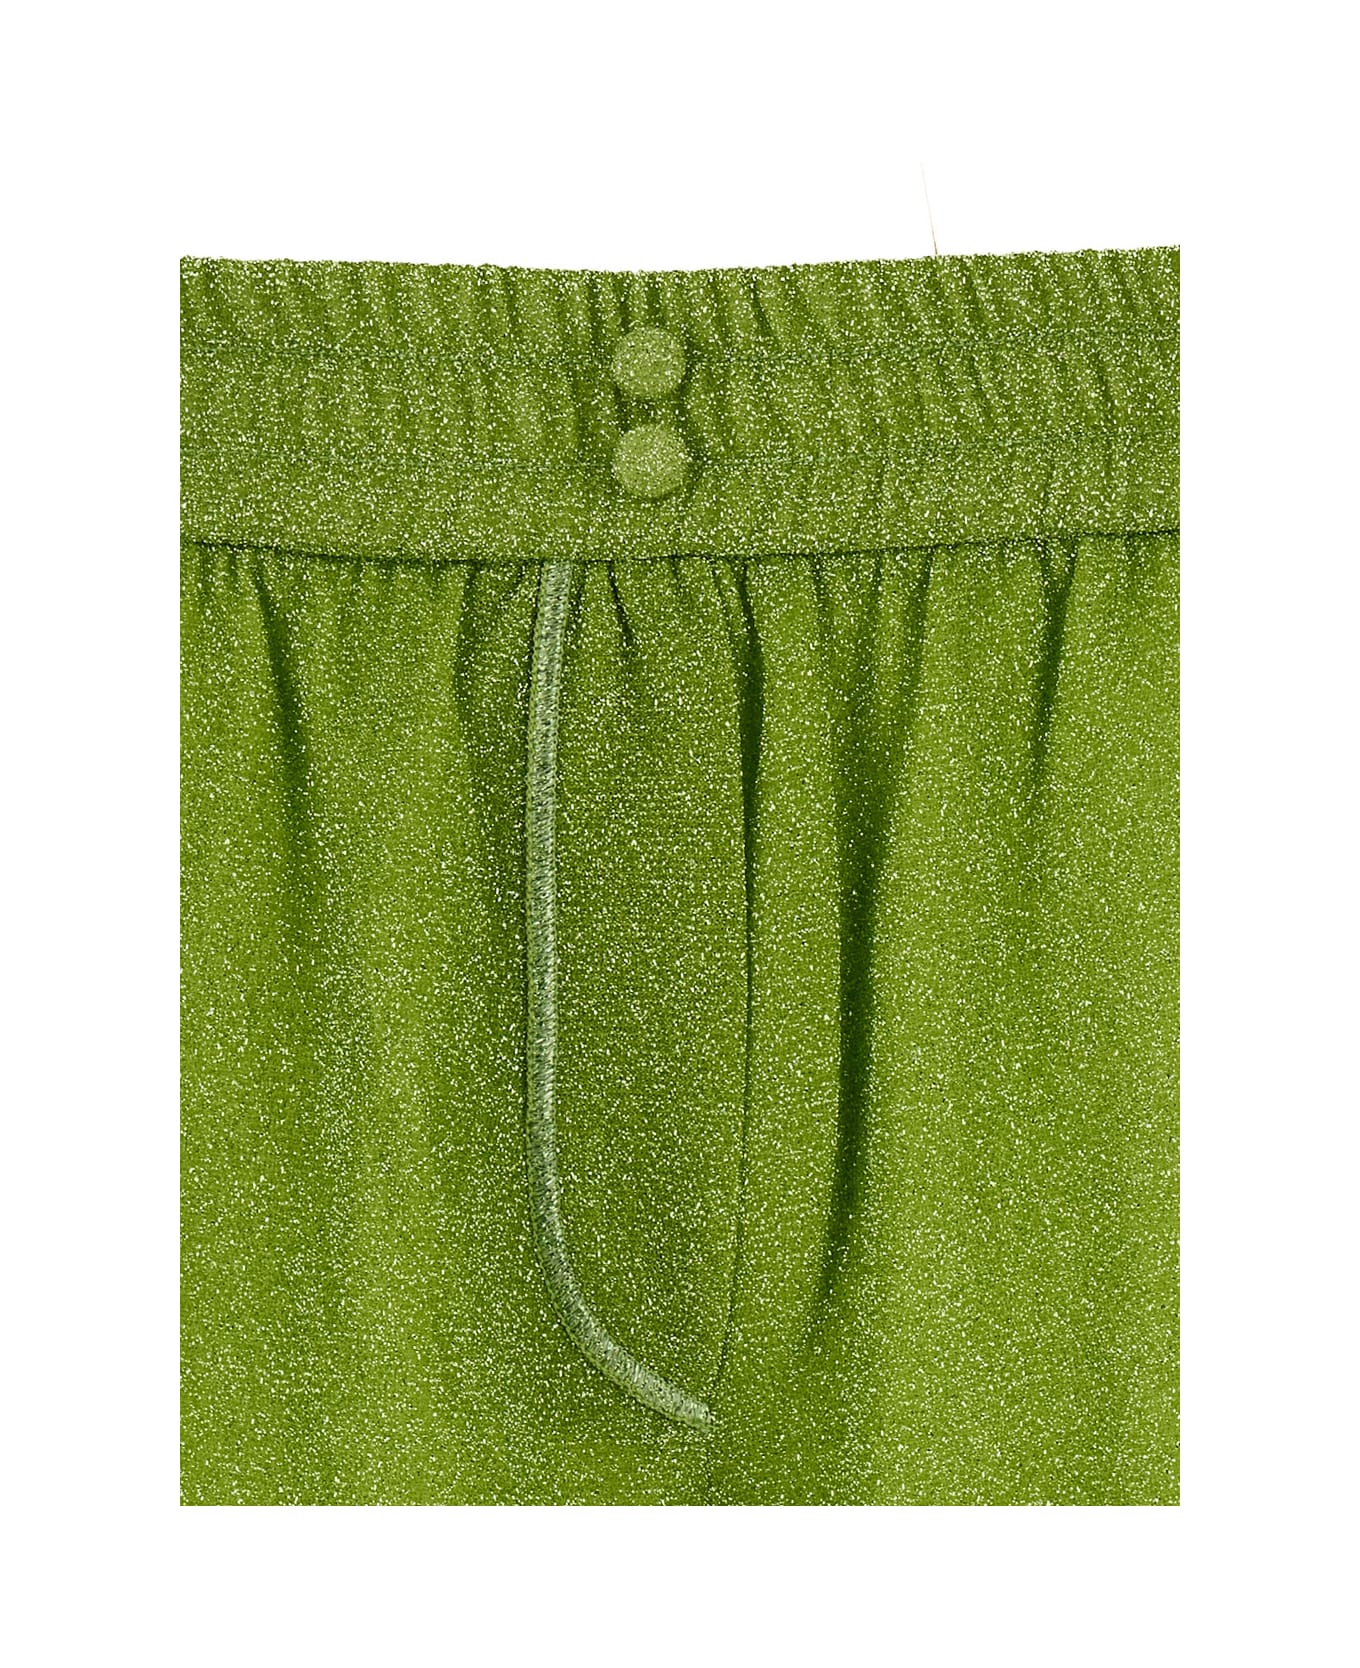 Oseree Green Shorts With Elastic Waistband In Lurex Woman - Green ショートパンツ